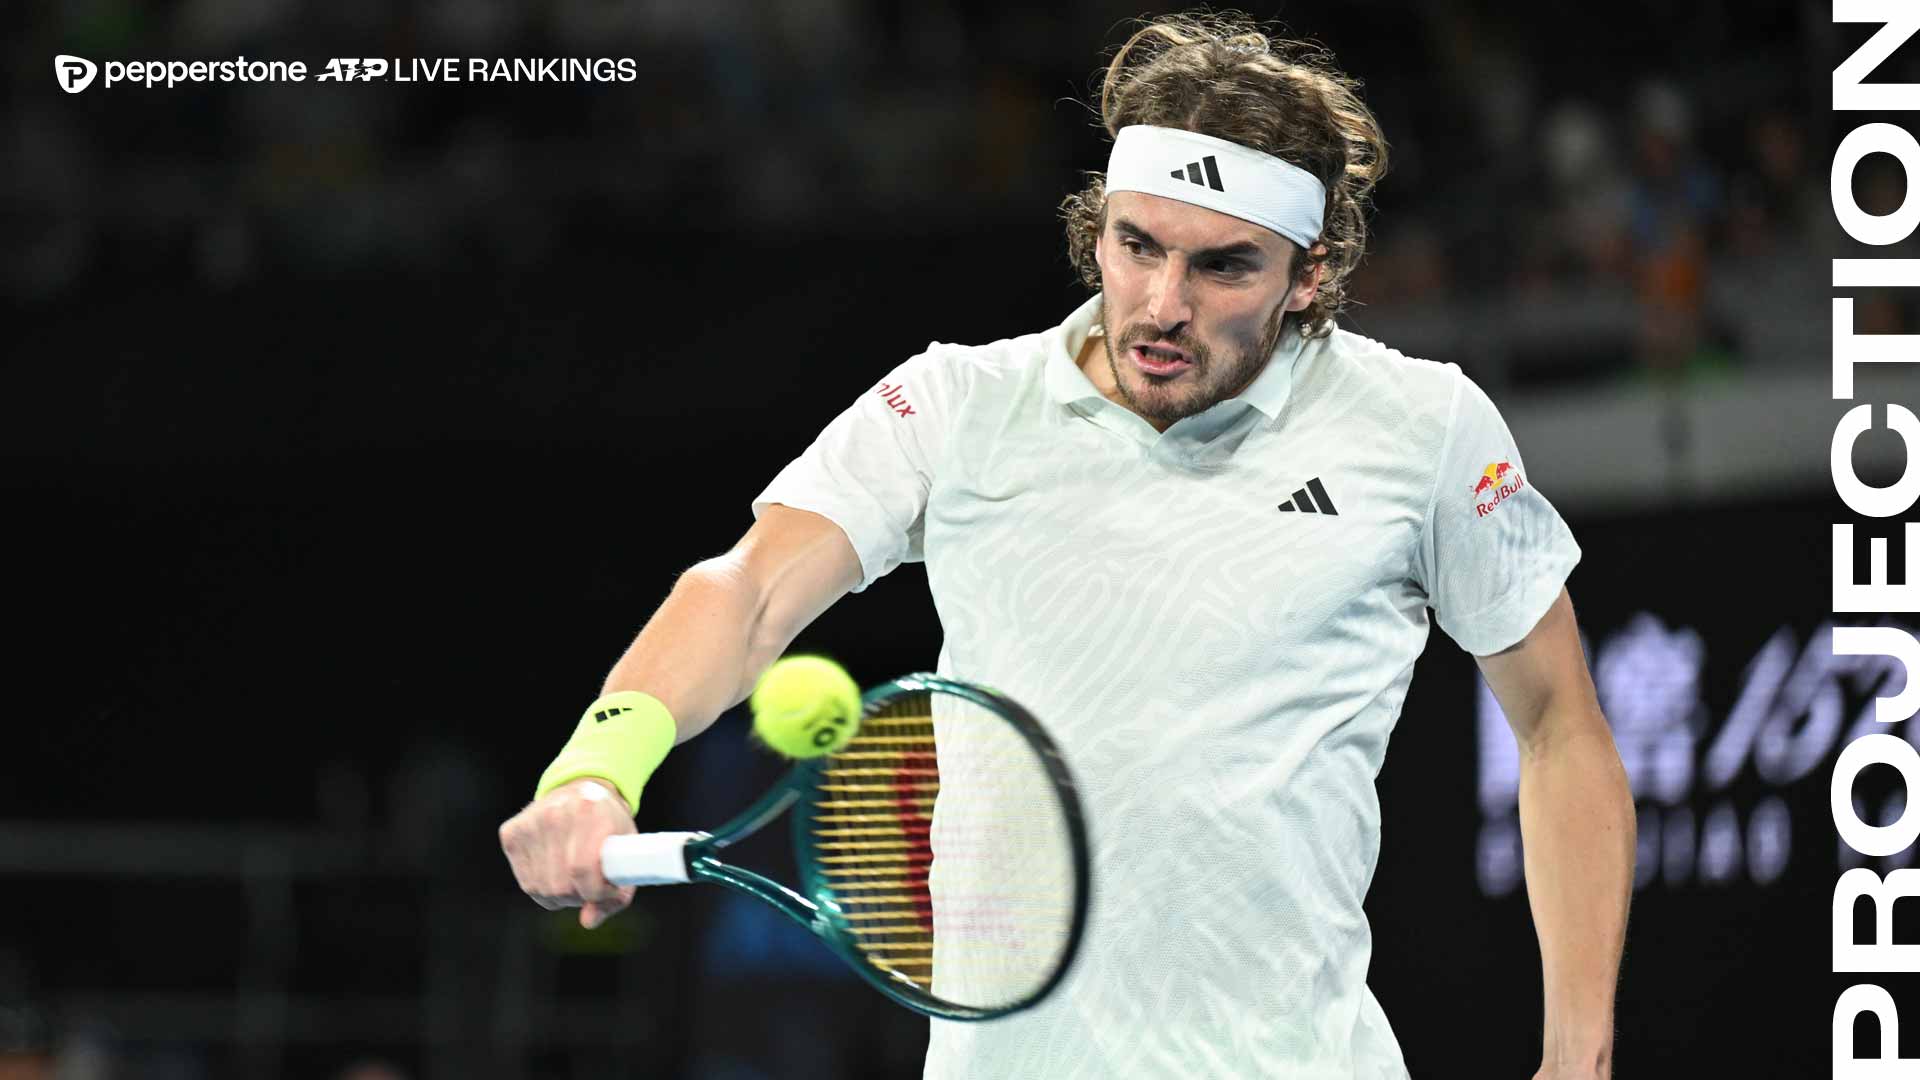 Stefanos Tsitsipas will drop from the Top 10 for the first time since March 2019.